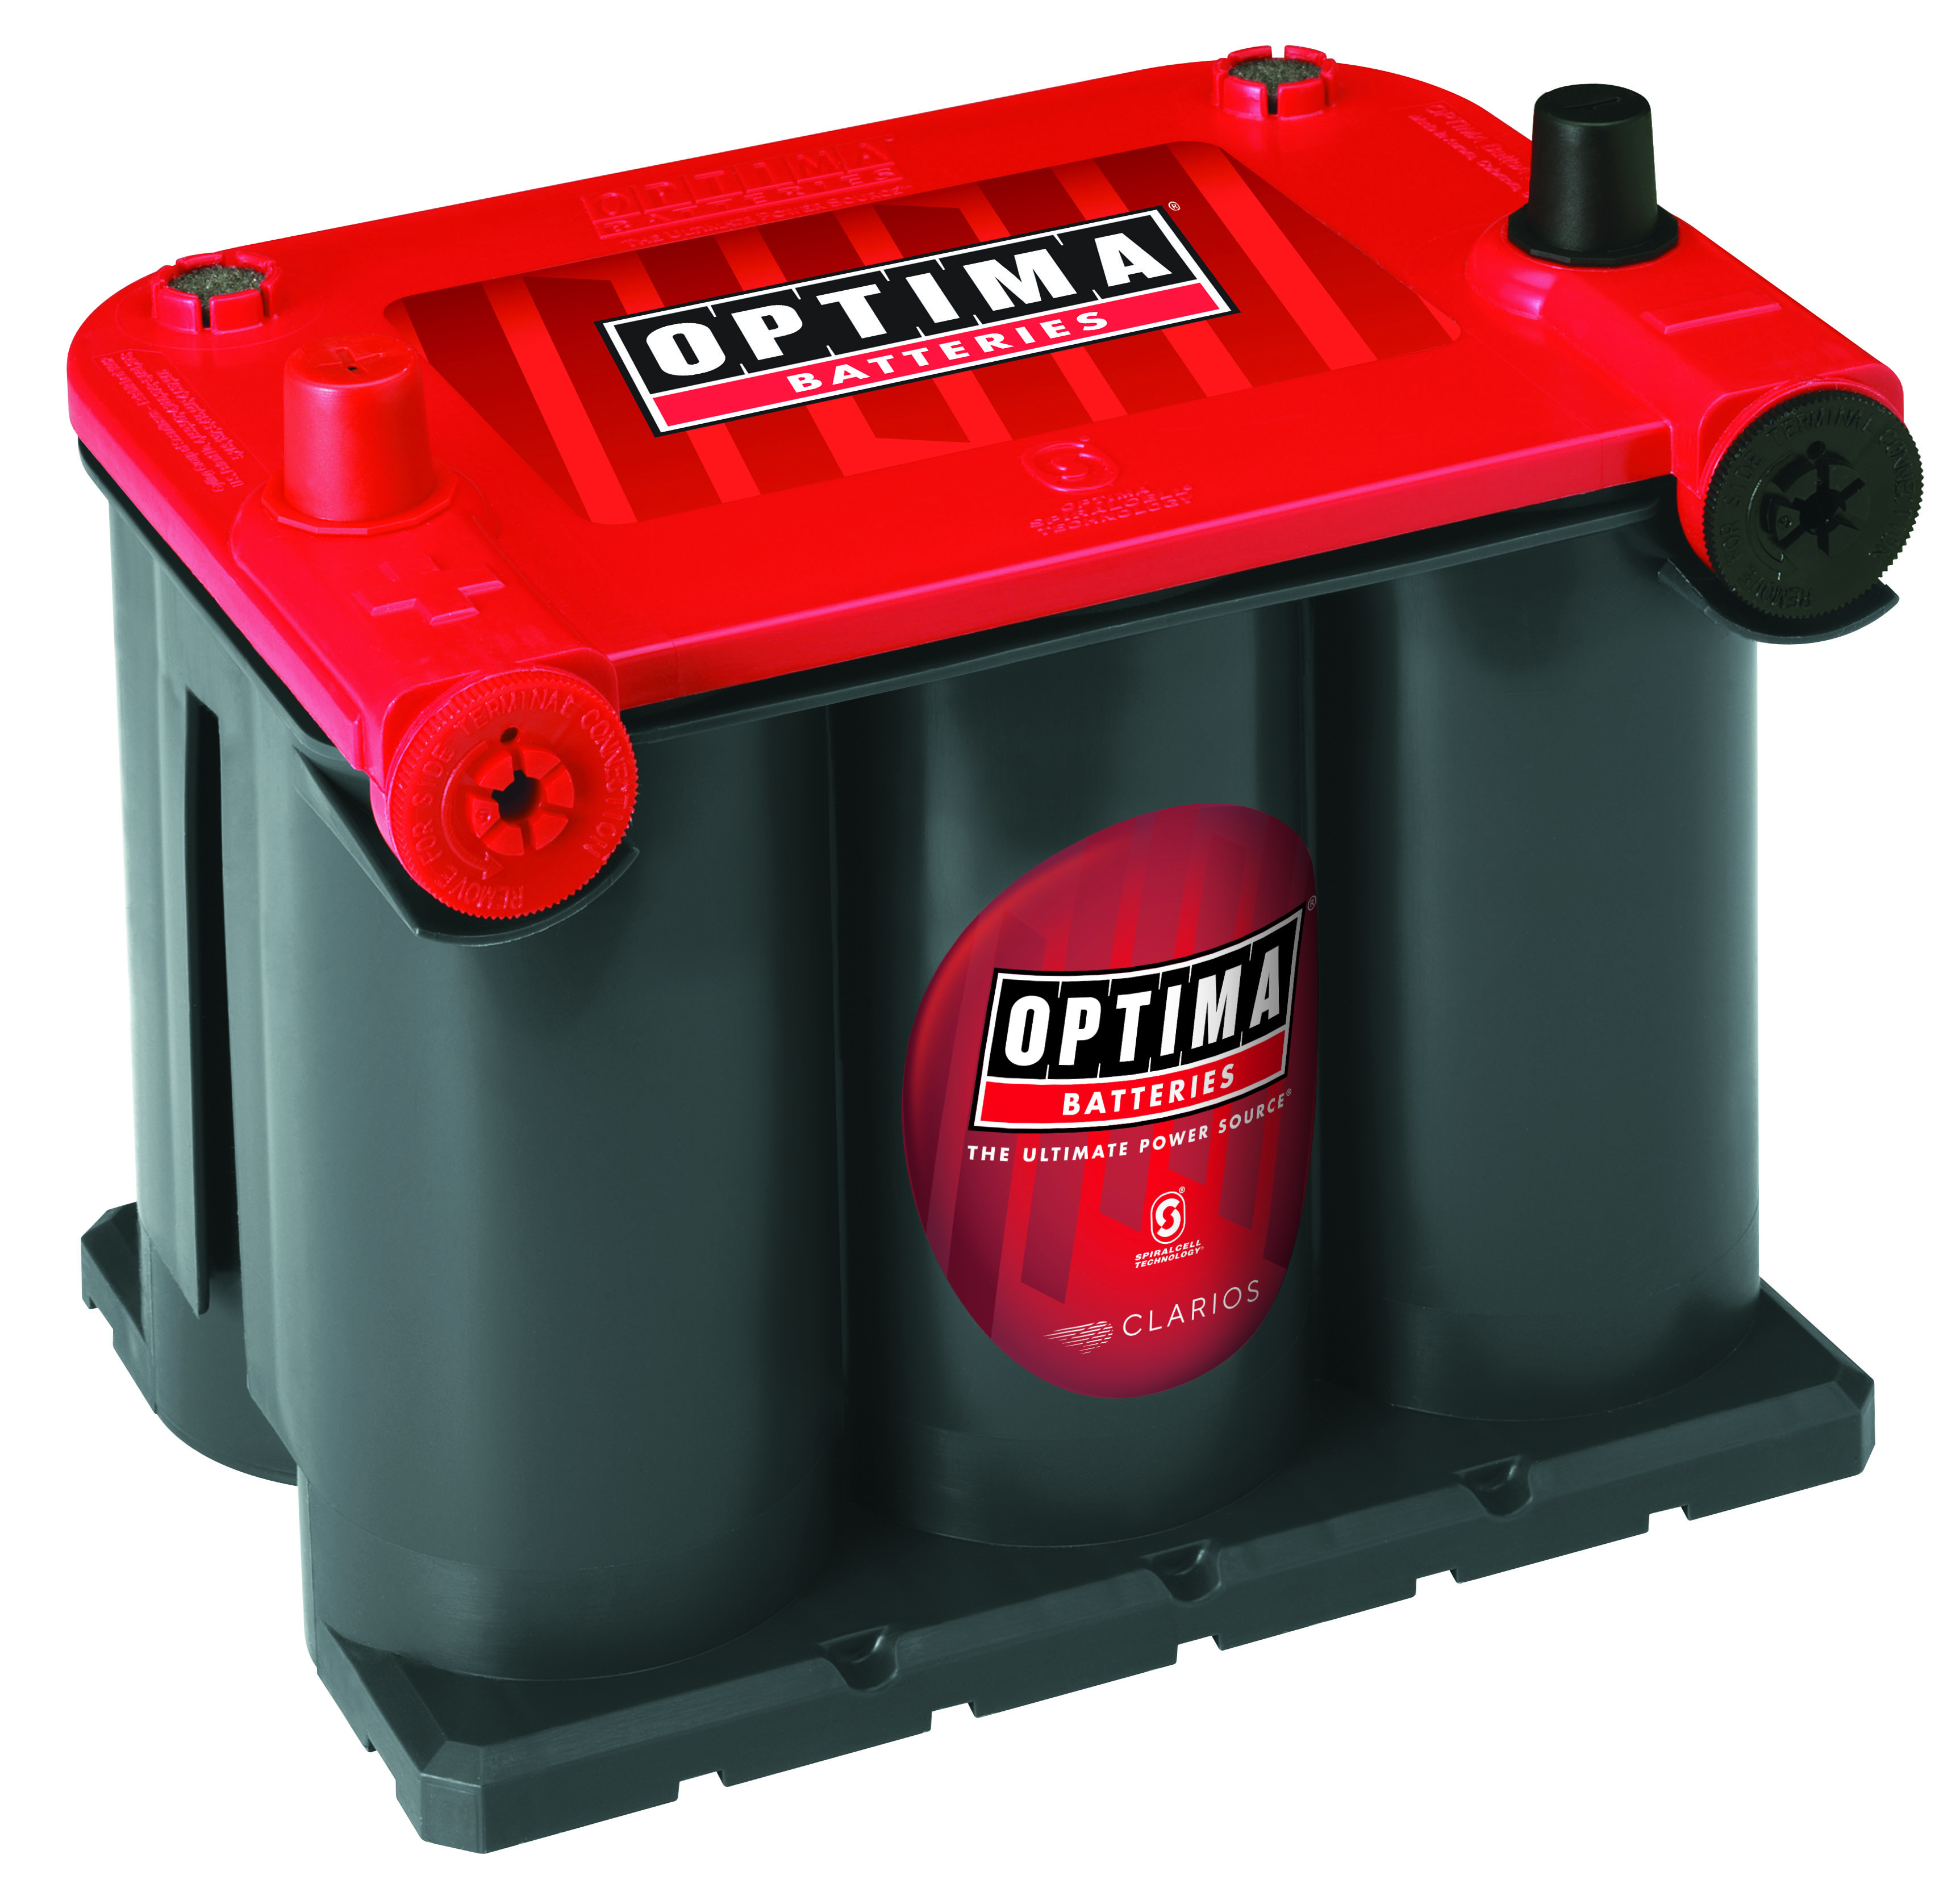 OPTIMA RedTop AGM Spiralcell Automotive Starting Battery, Group Size 75/25, 12 Volt 720 CCA - image 1 of 5